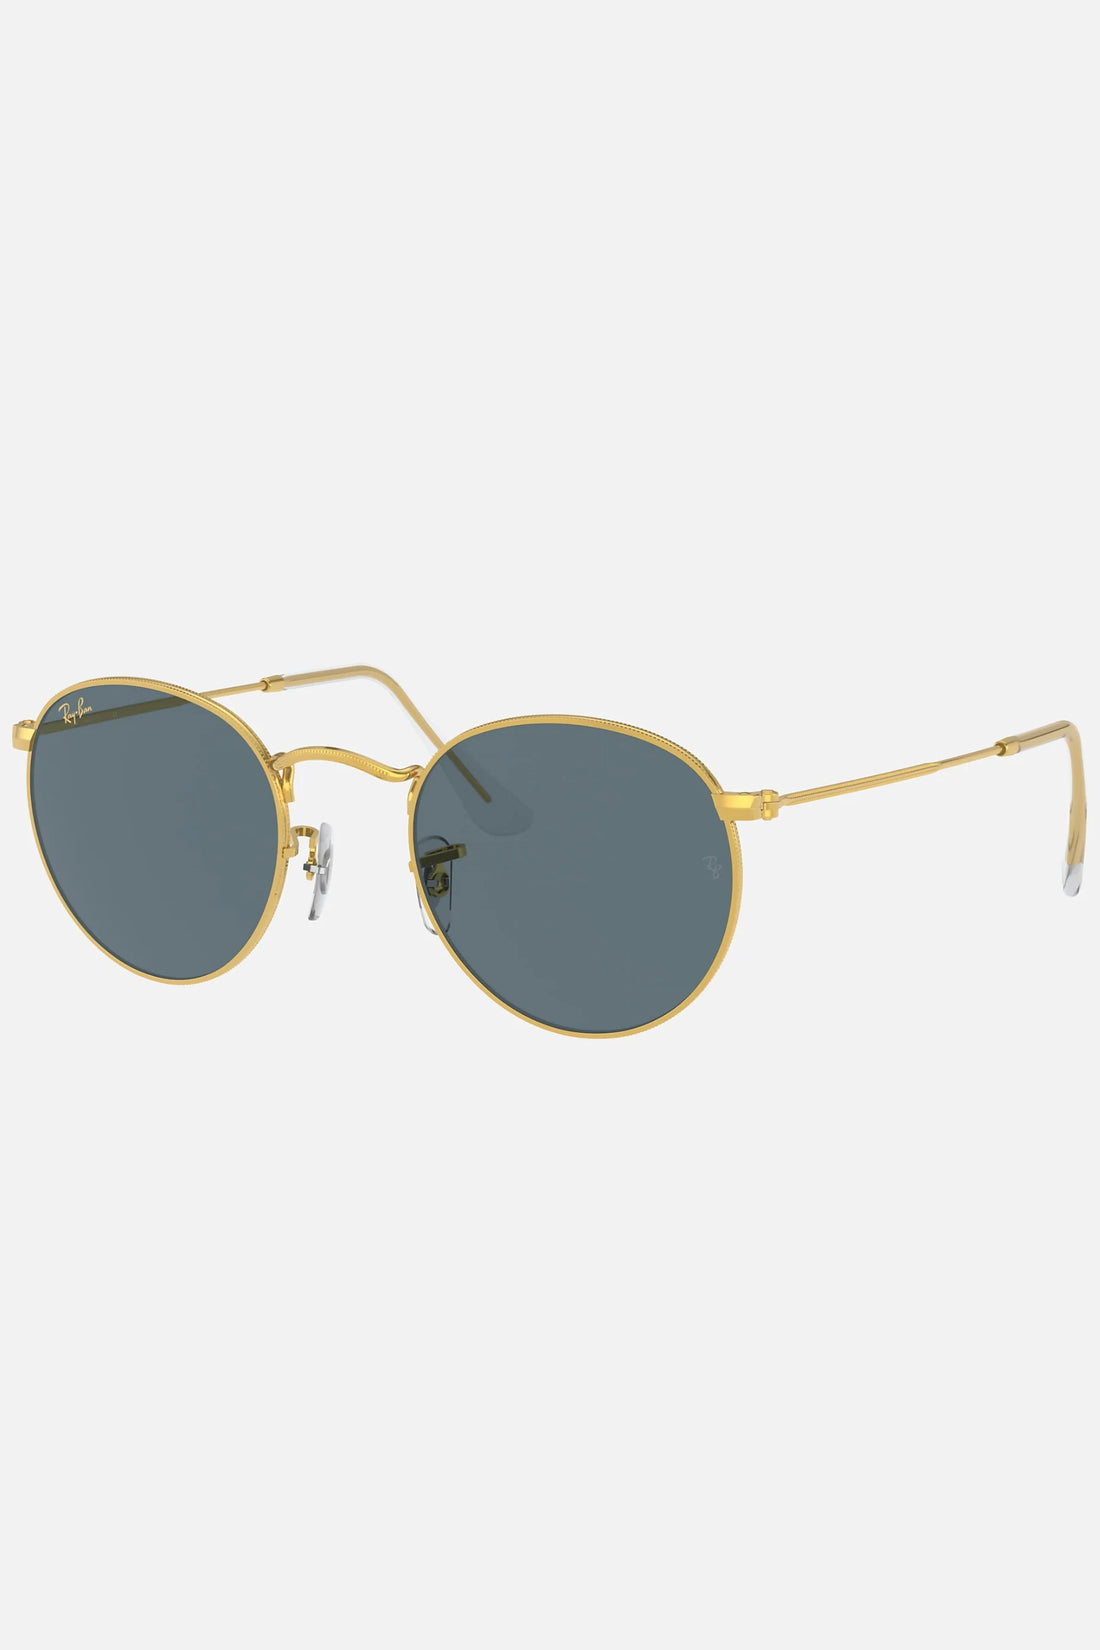 Ray-Ban RB3447 9196R5 Round Metal Legend Gold